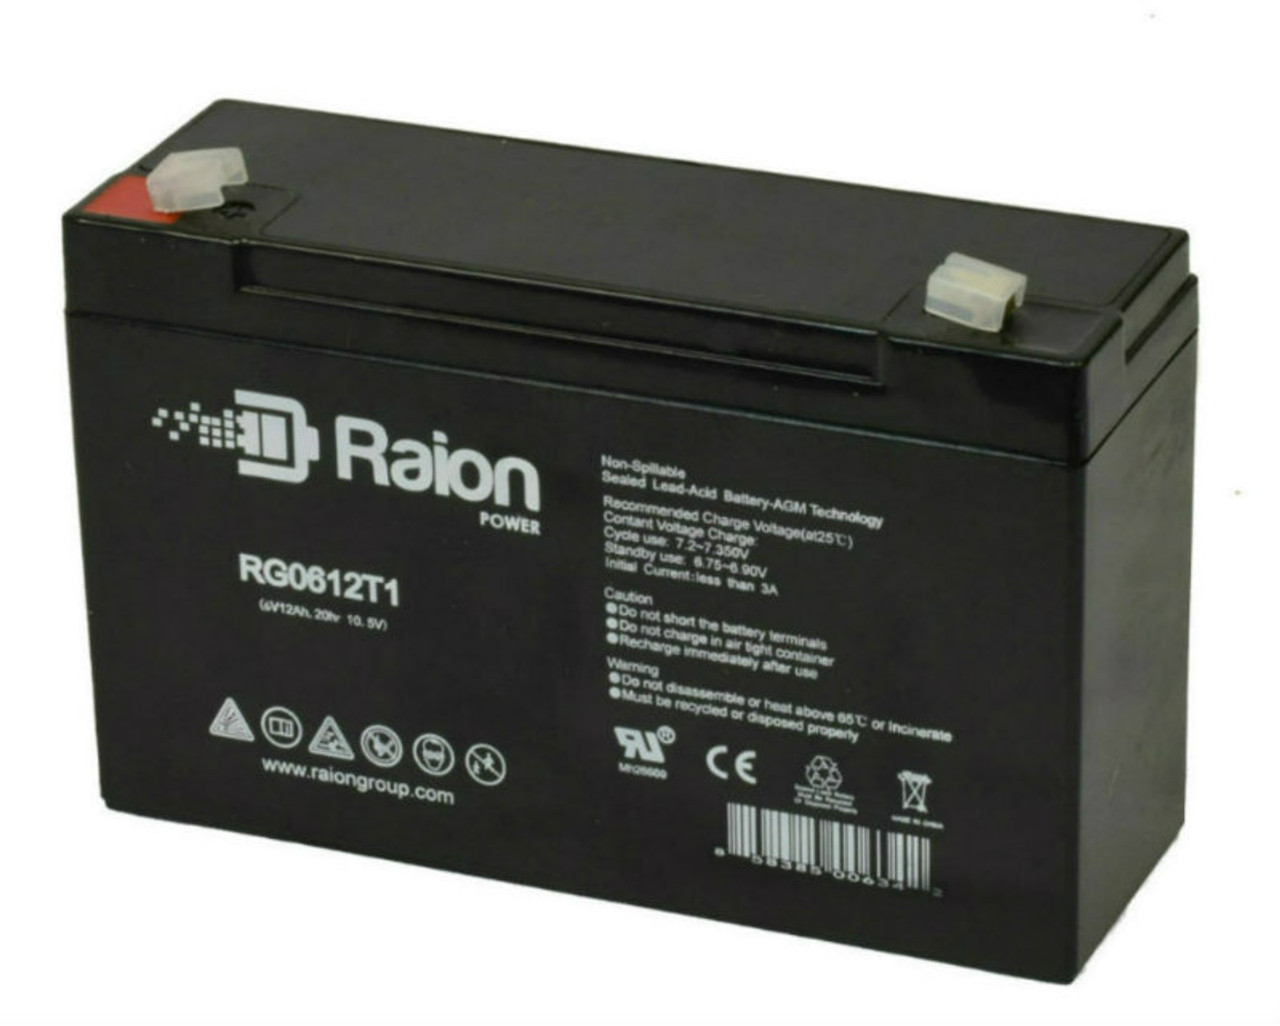 Raion Power RG06120T1 Replacement Emergency Light Battery for Lithonia ELB0610/12